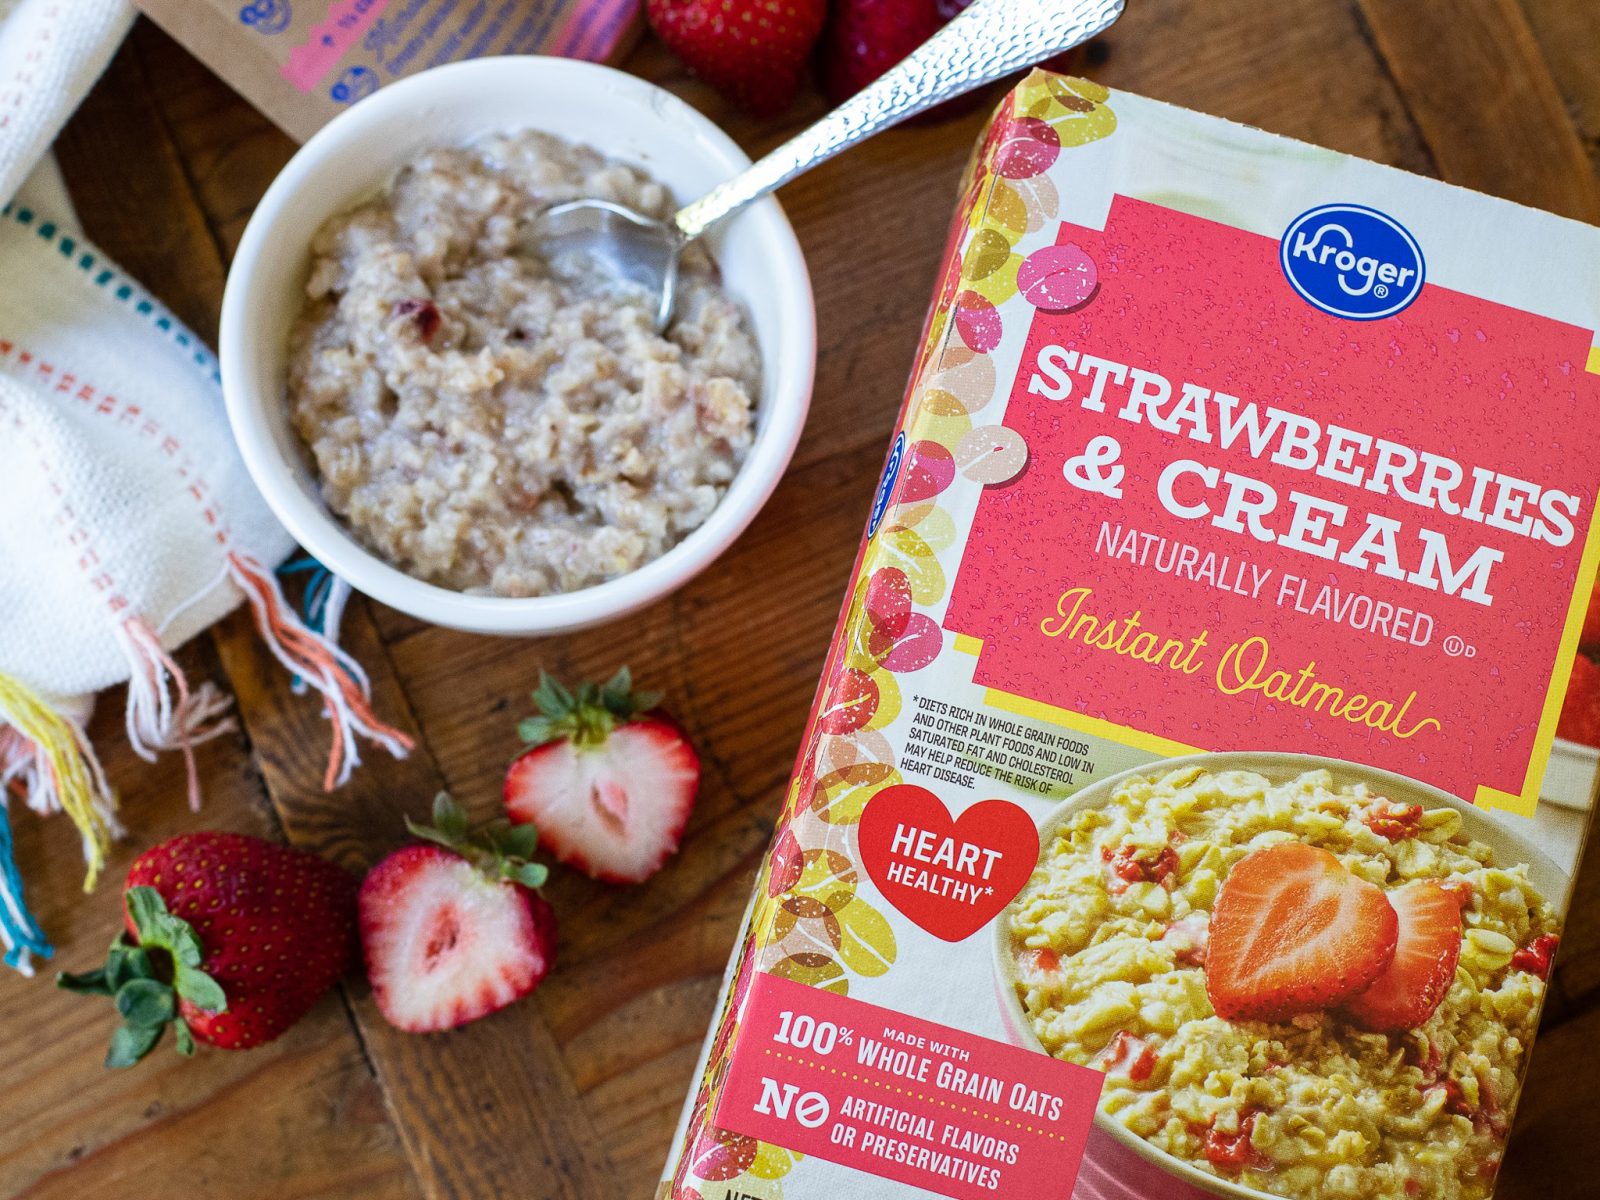 Get The Boxes Of Kroger Instant Oatmeal For Just 99¢ At Kroger